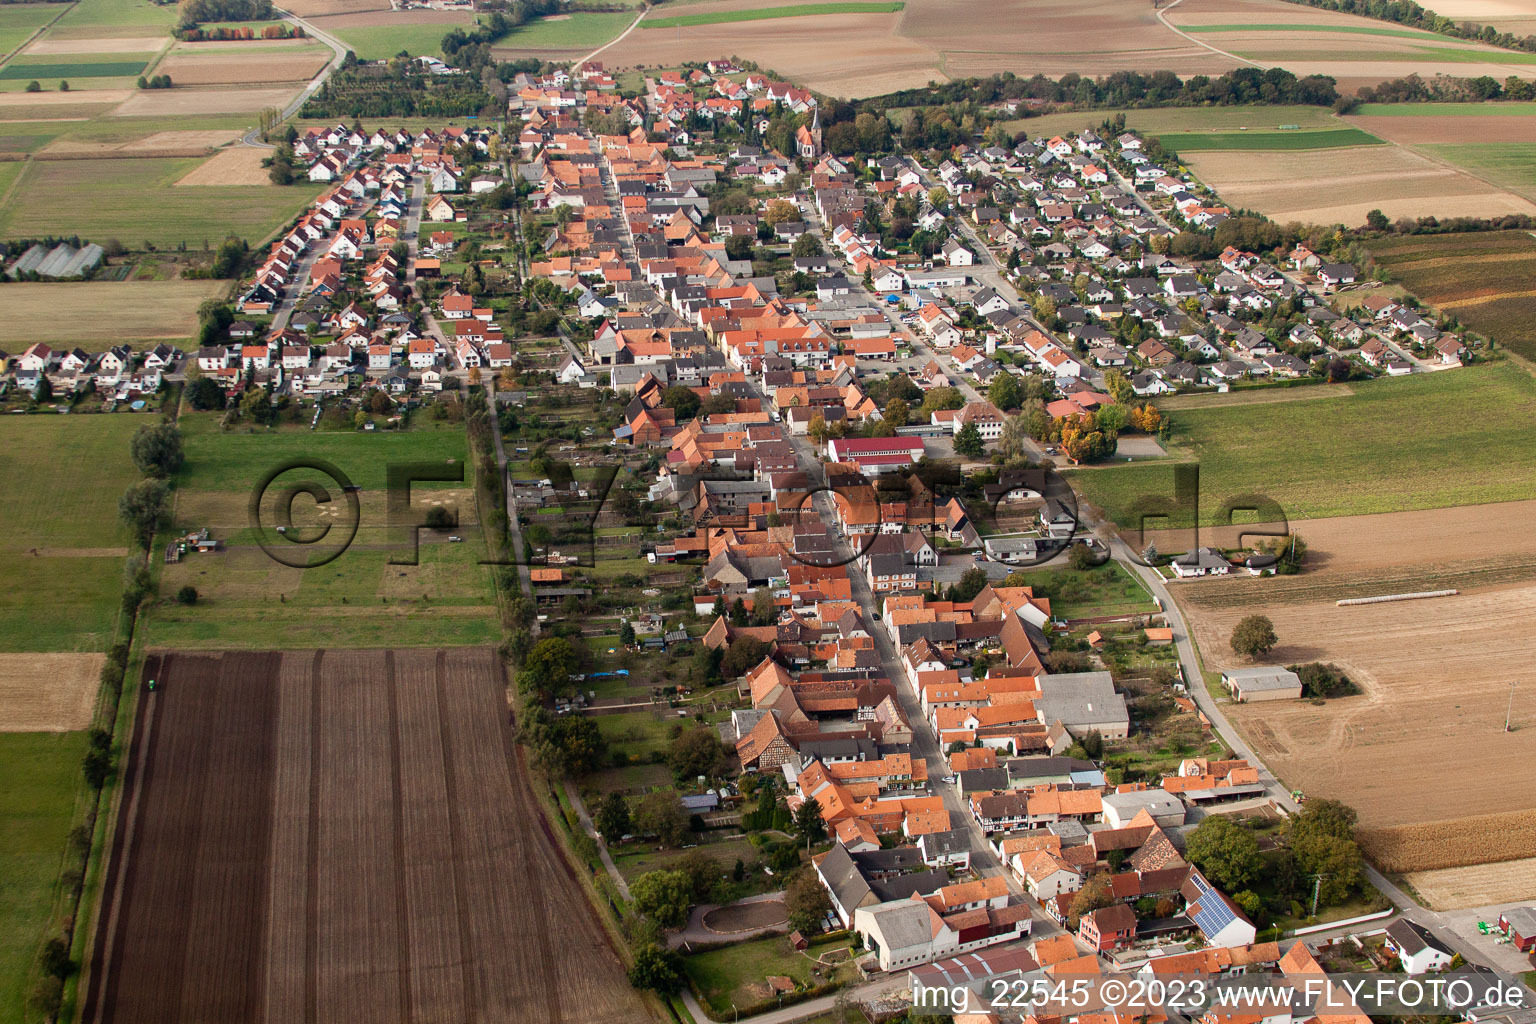 Drone image of Freckenfeld in the state Rhineland-Palatinate, Germany